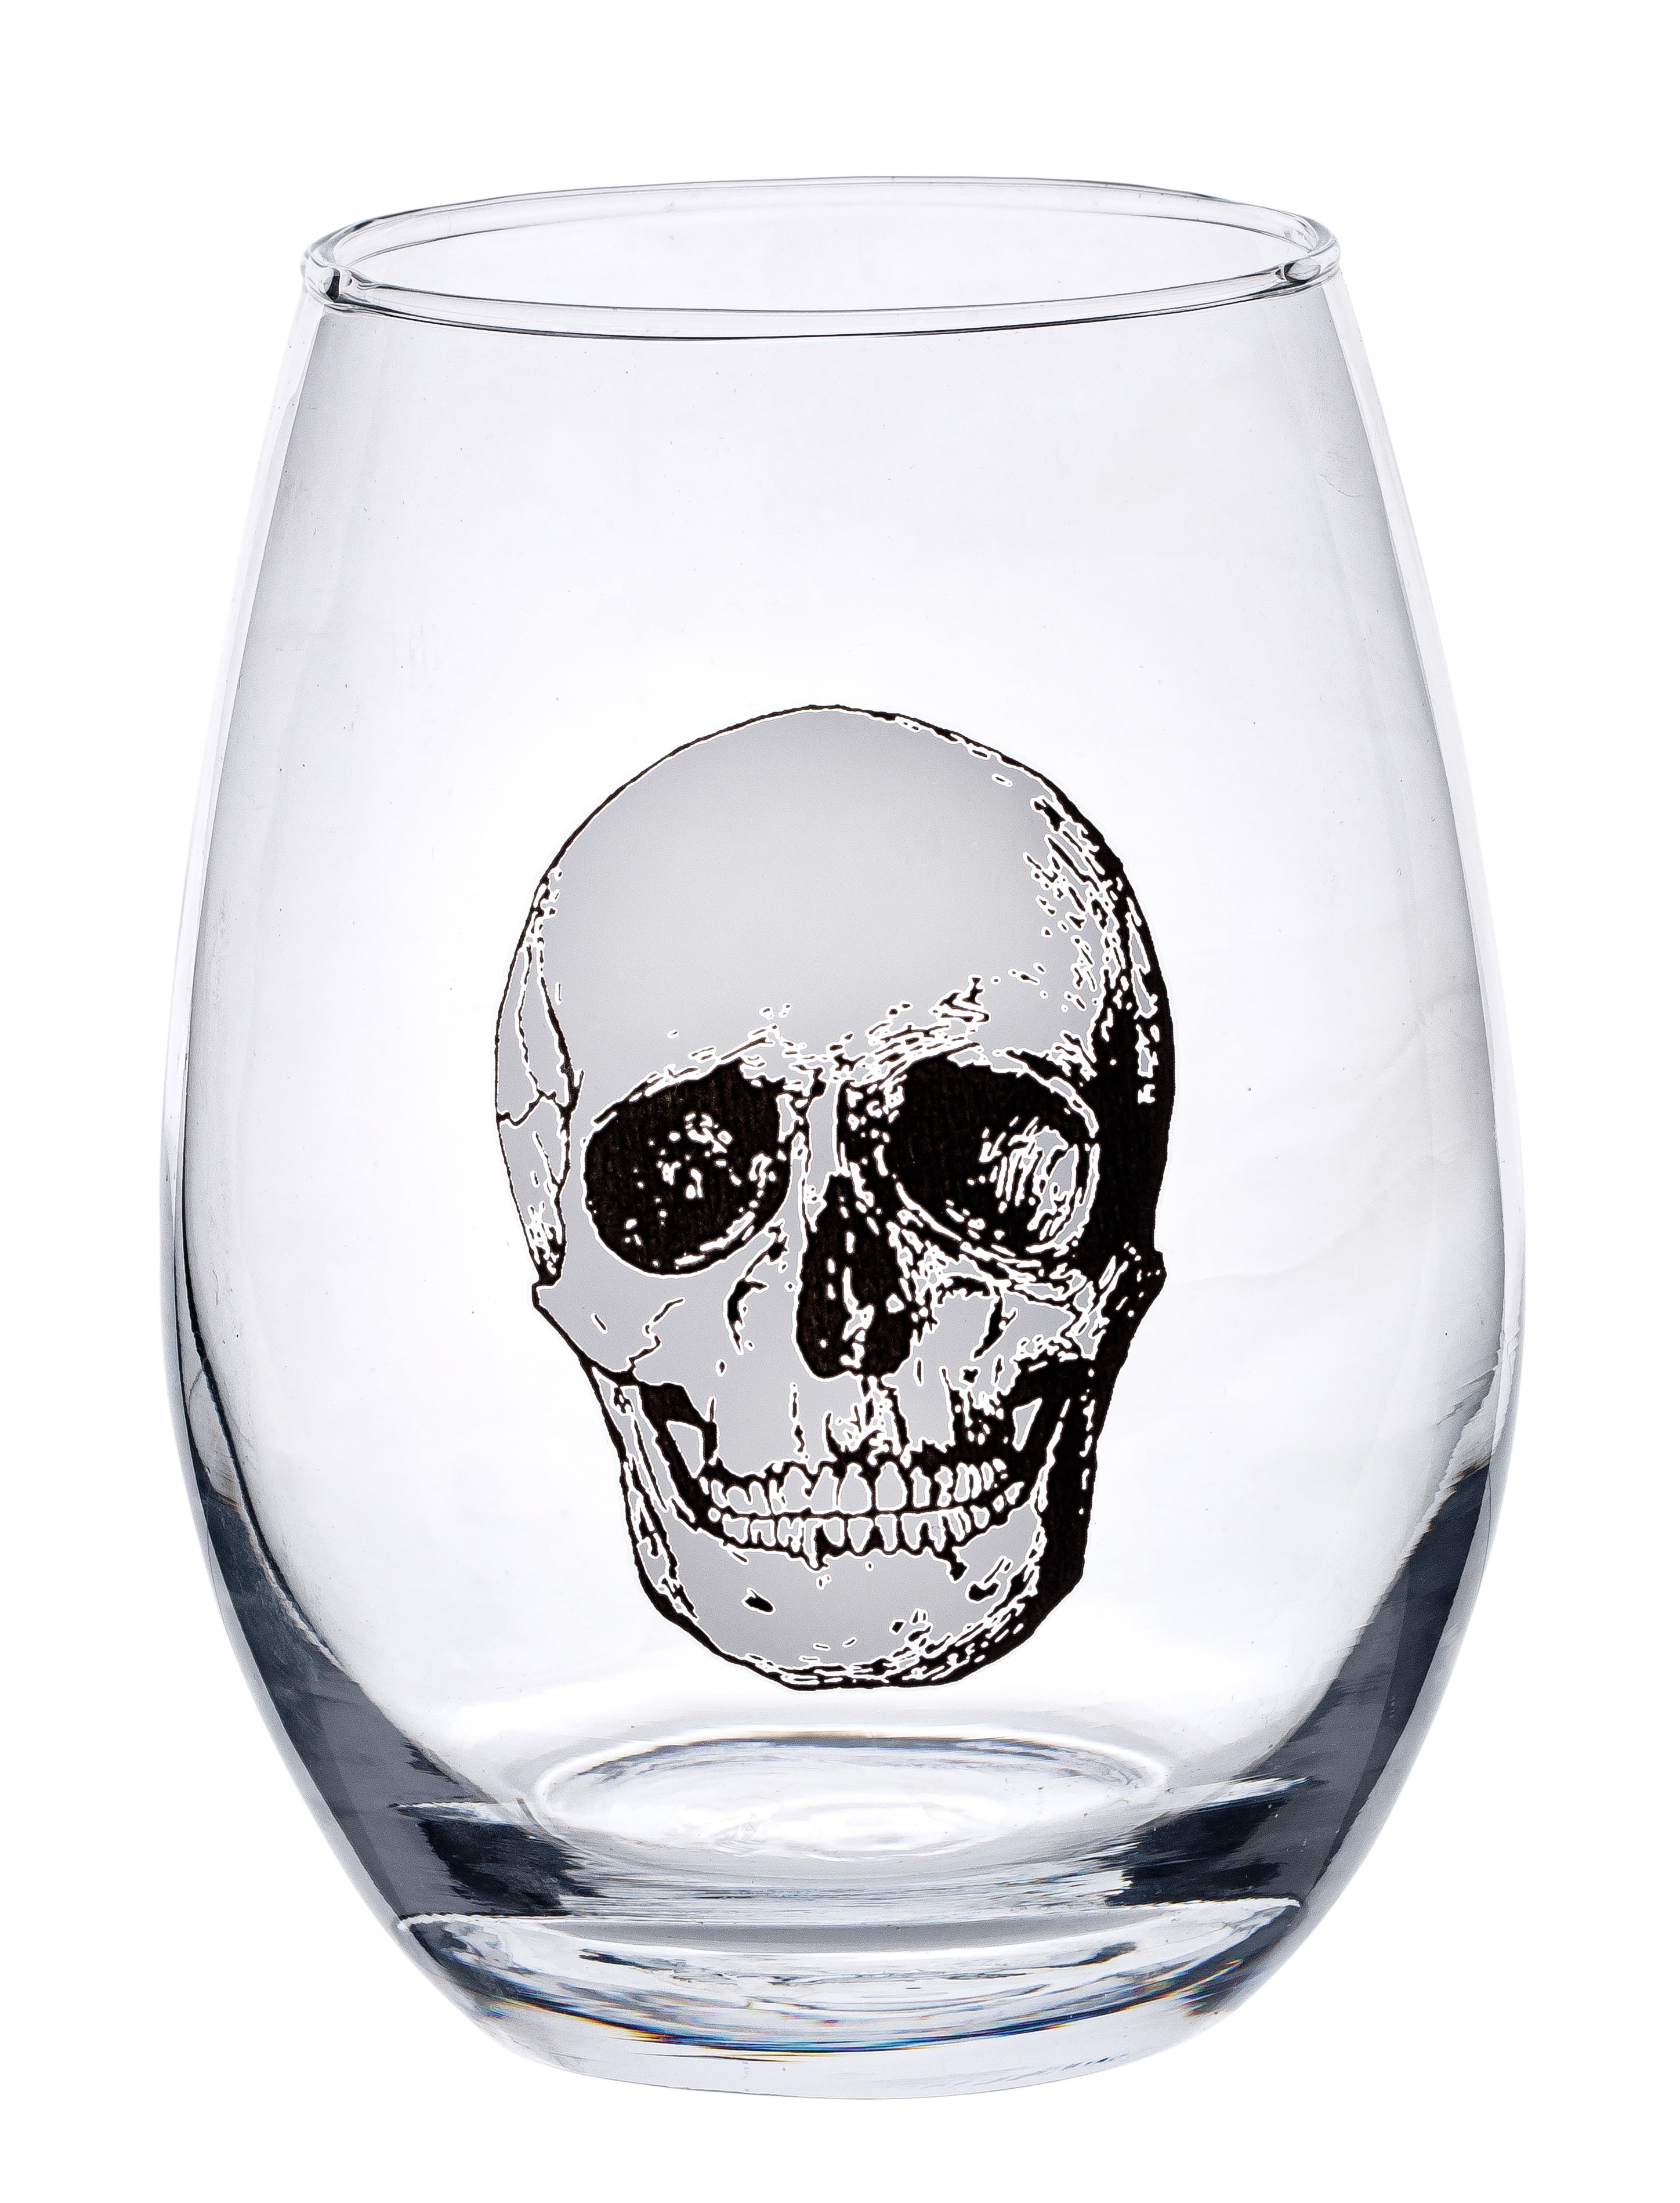 Etched Stemless Wine Glass with your text, logo, or graphics